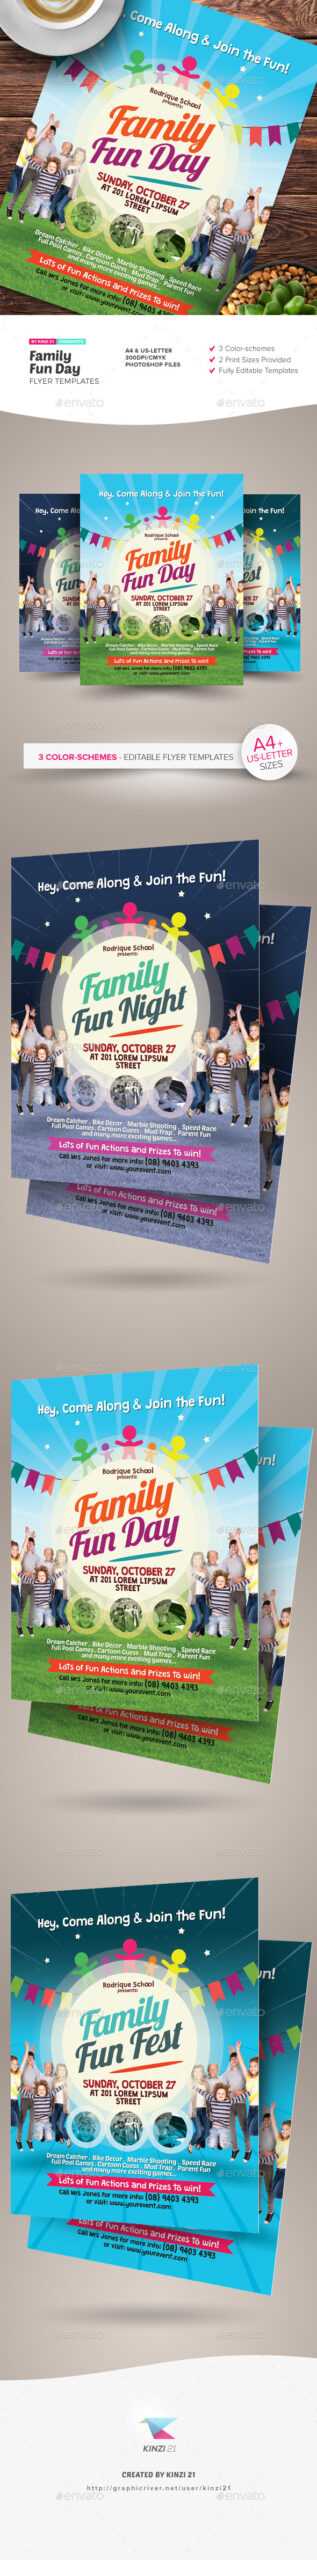 Family Day Flyer Graphics, Designs & Templates From Graphicriver With Family Day Flyer Template